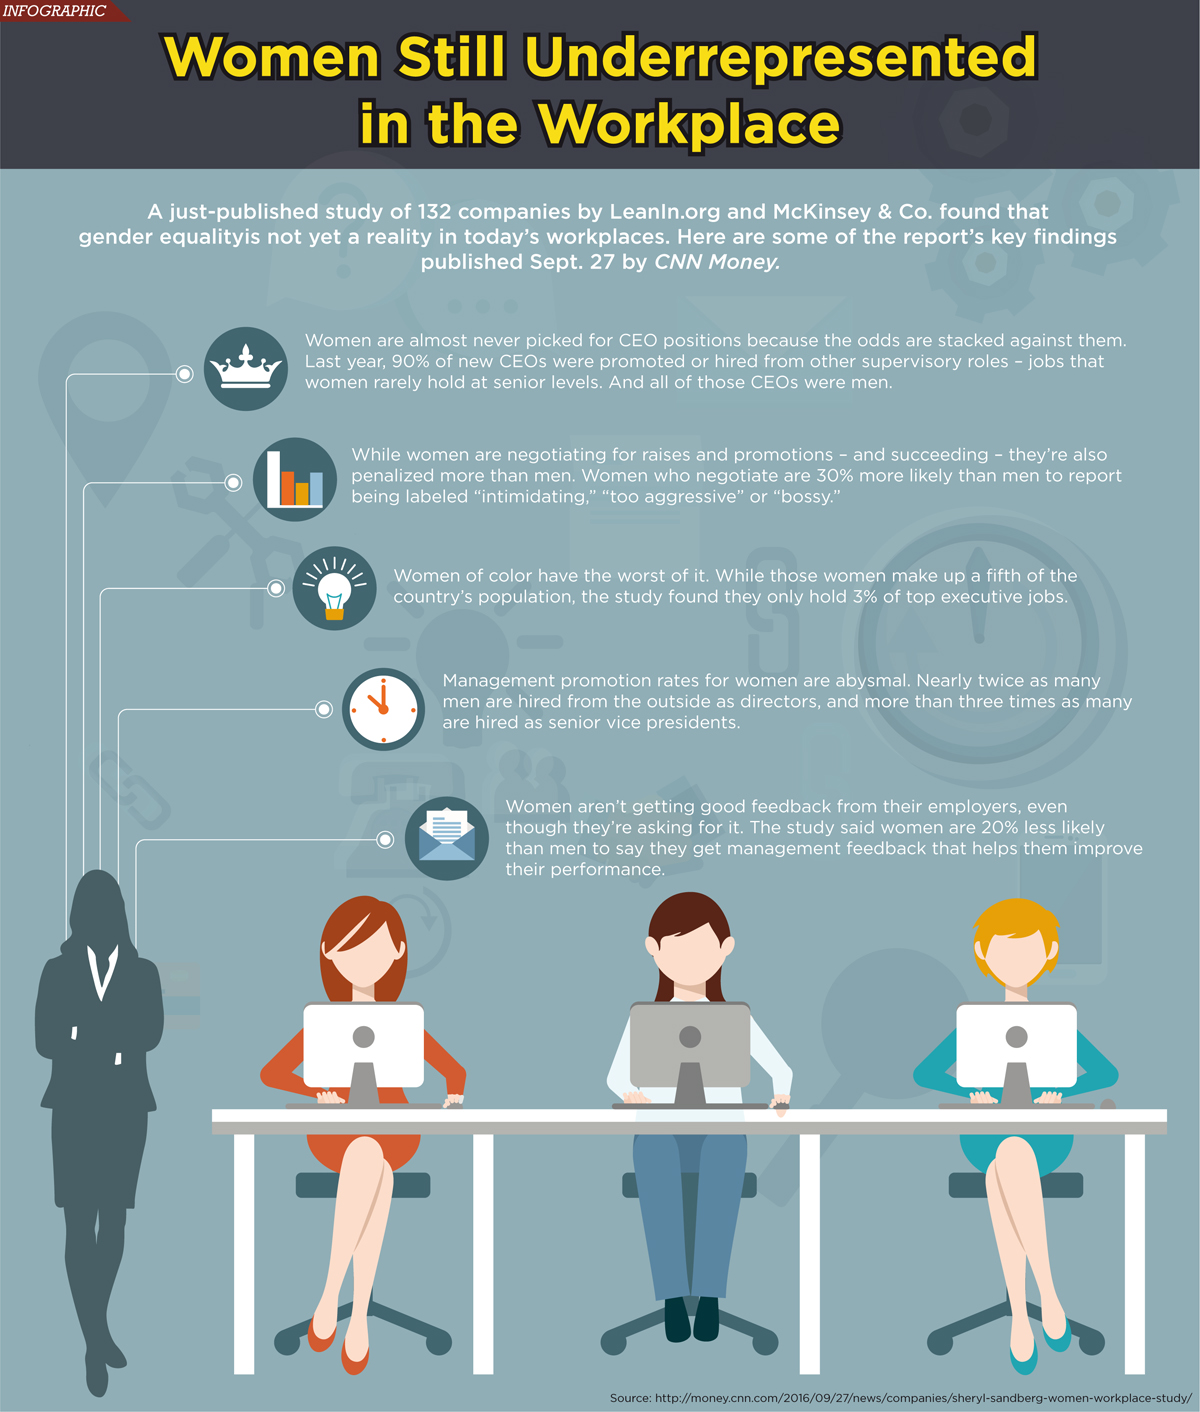 https://images.cutimes.com/cutimes/article/2016/10/08/women-in-the-workplace-infographic.jpg